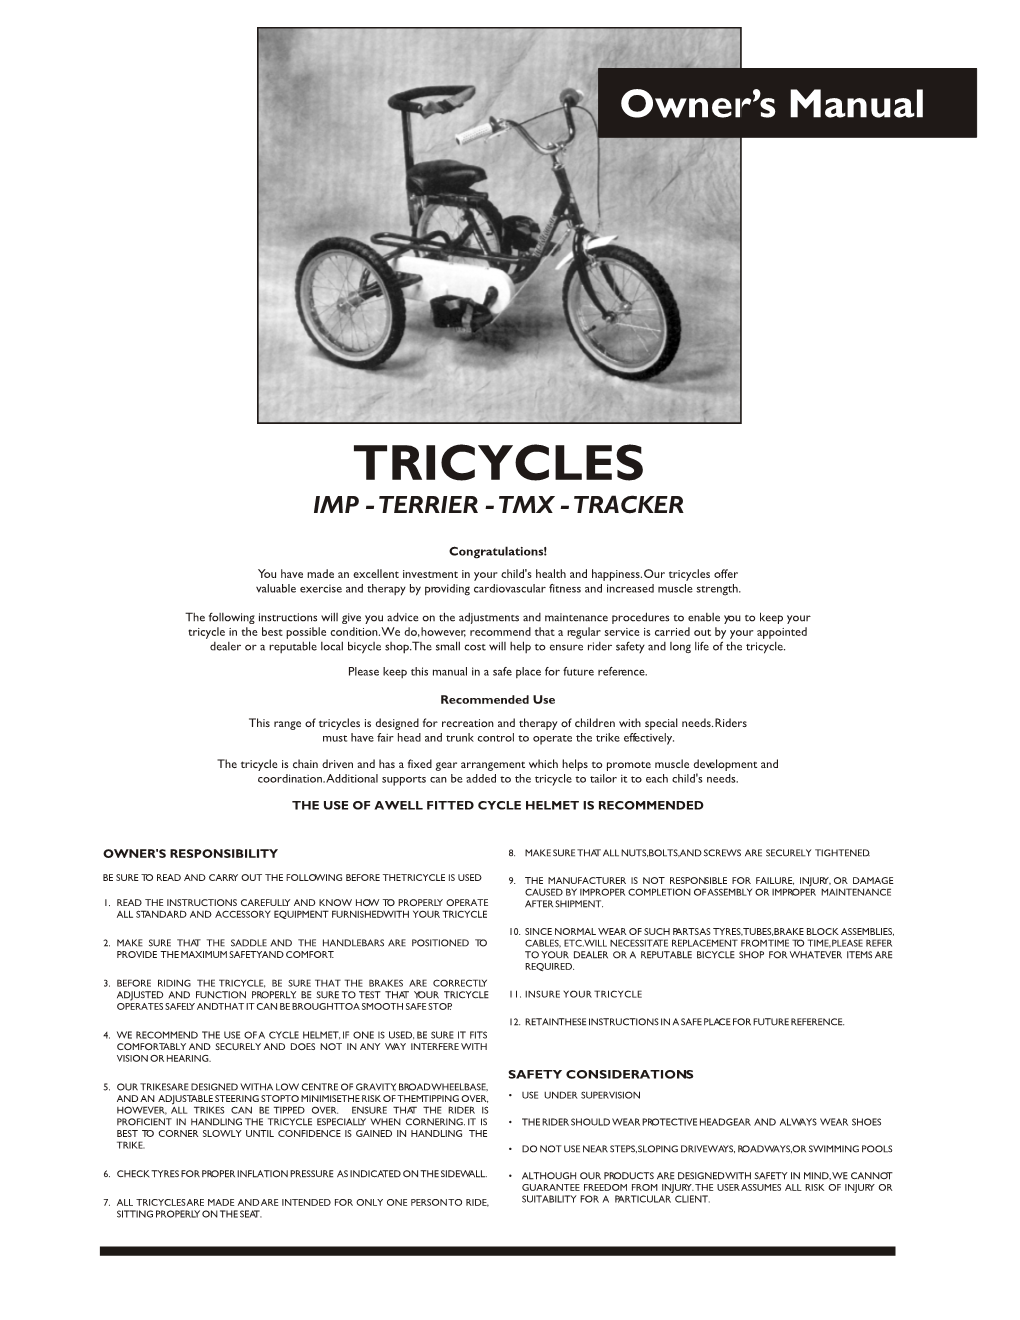 Tricycles Imp - Terrier - Tmx - Tracker